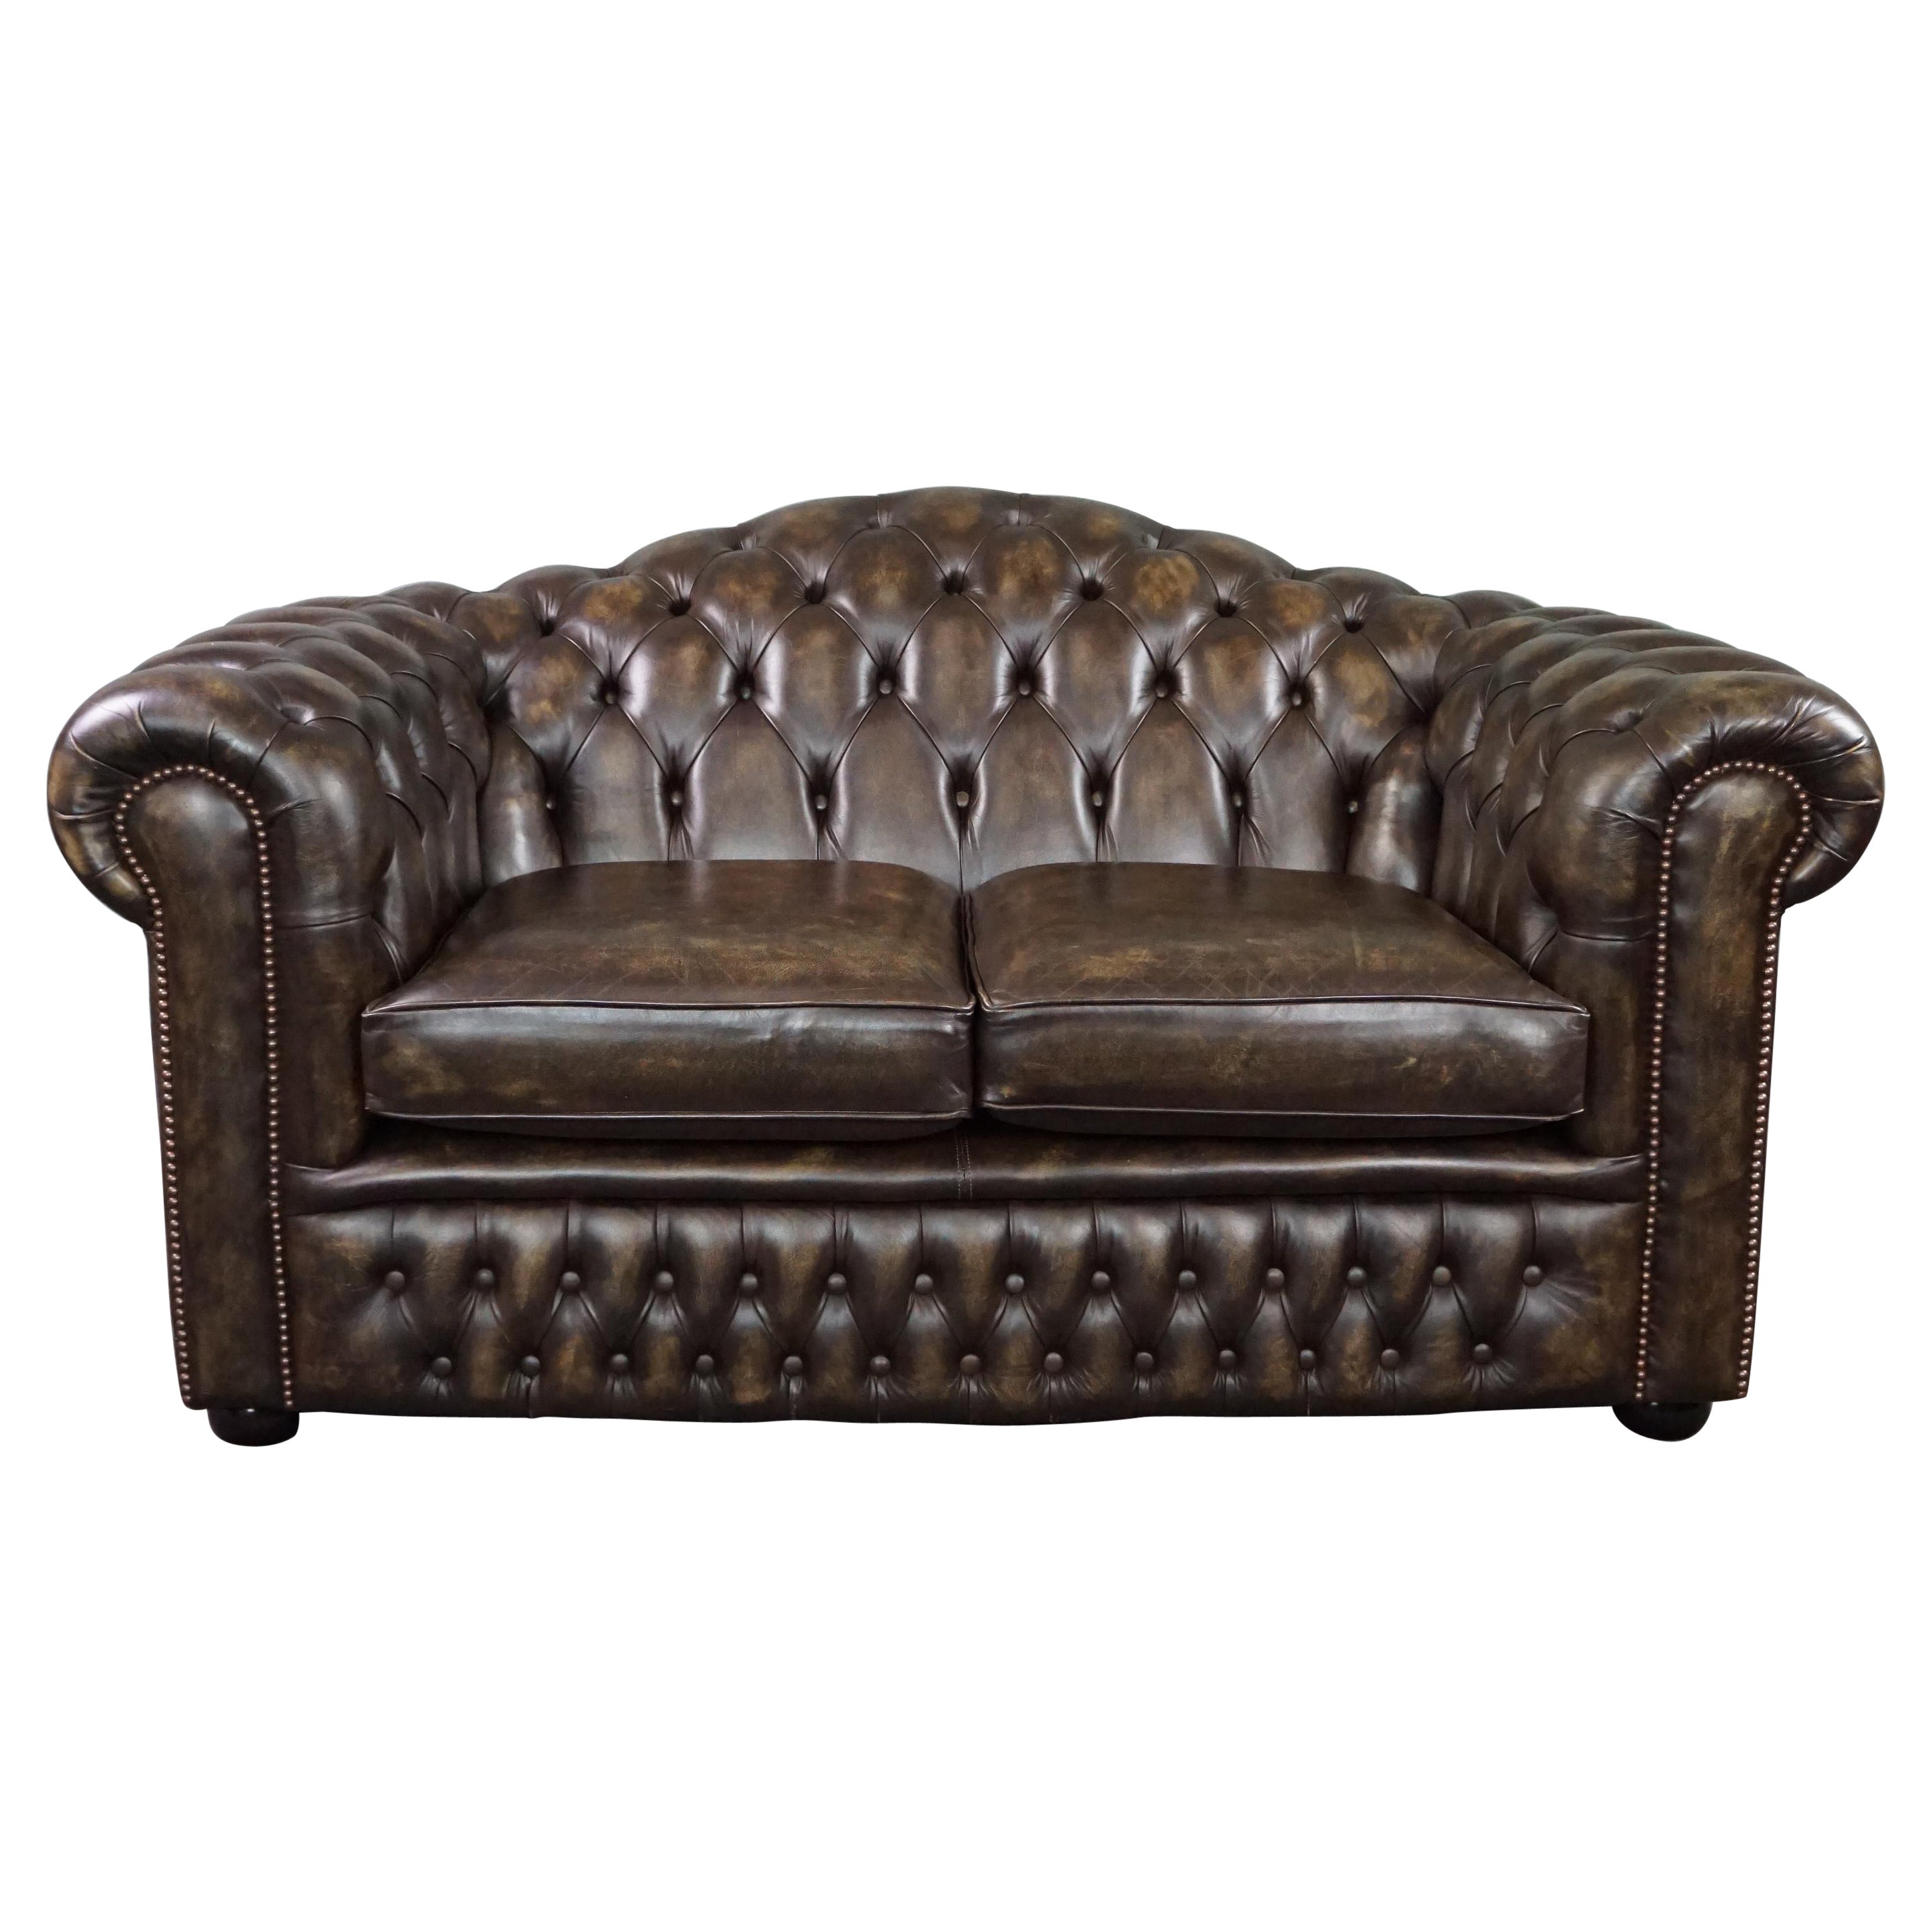 Stunning cow leather Chesterfield sofa, 2 seater For Sale